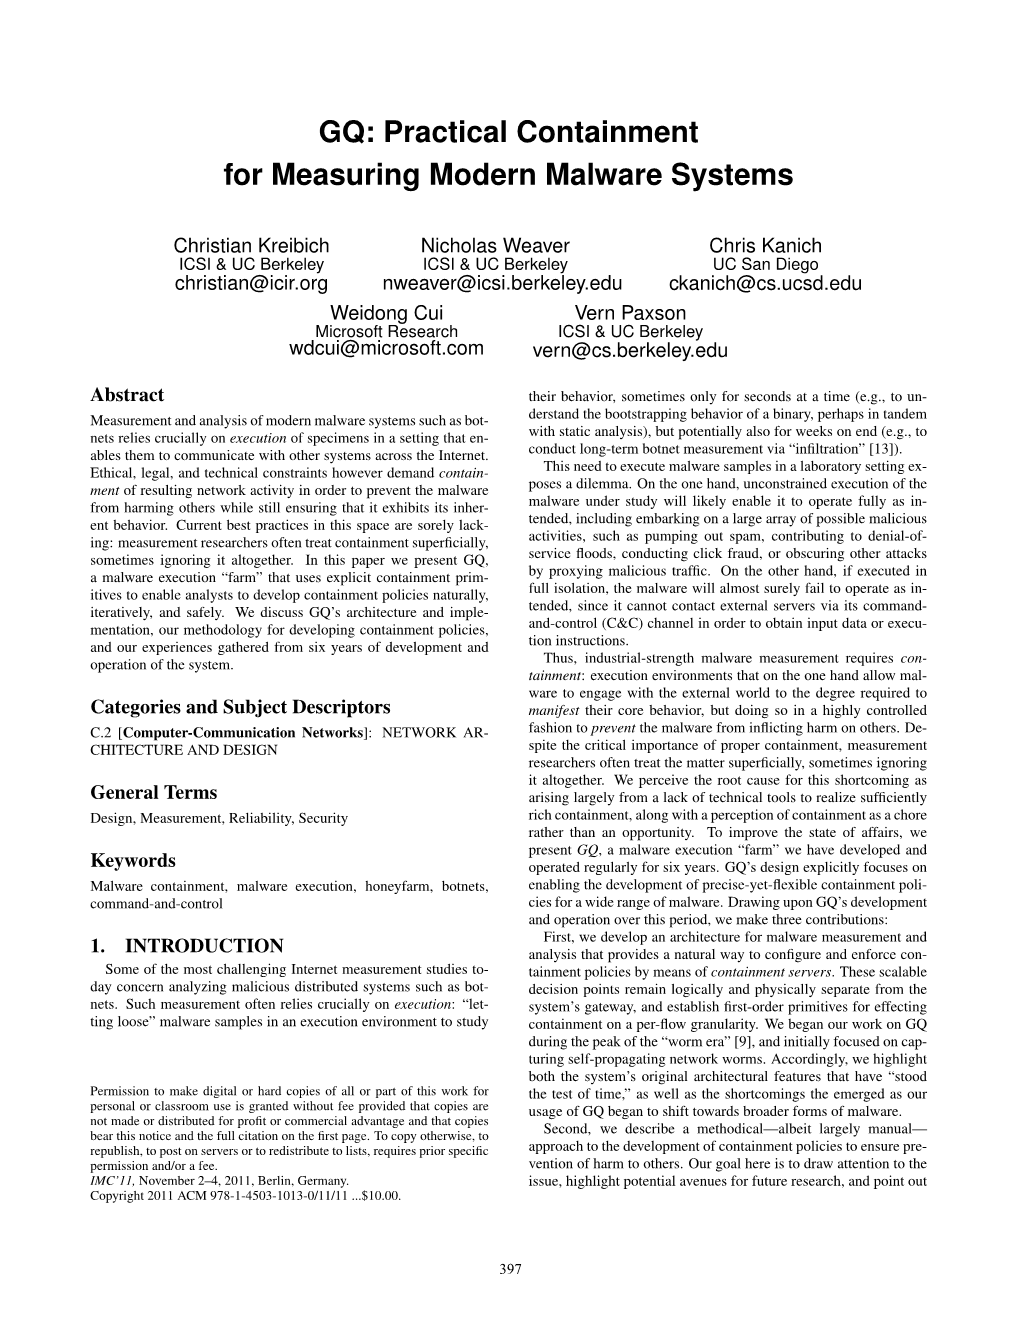 GQ: Practical Containment for Measuring Modern Malware Systems